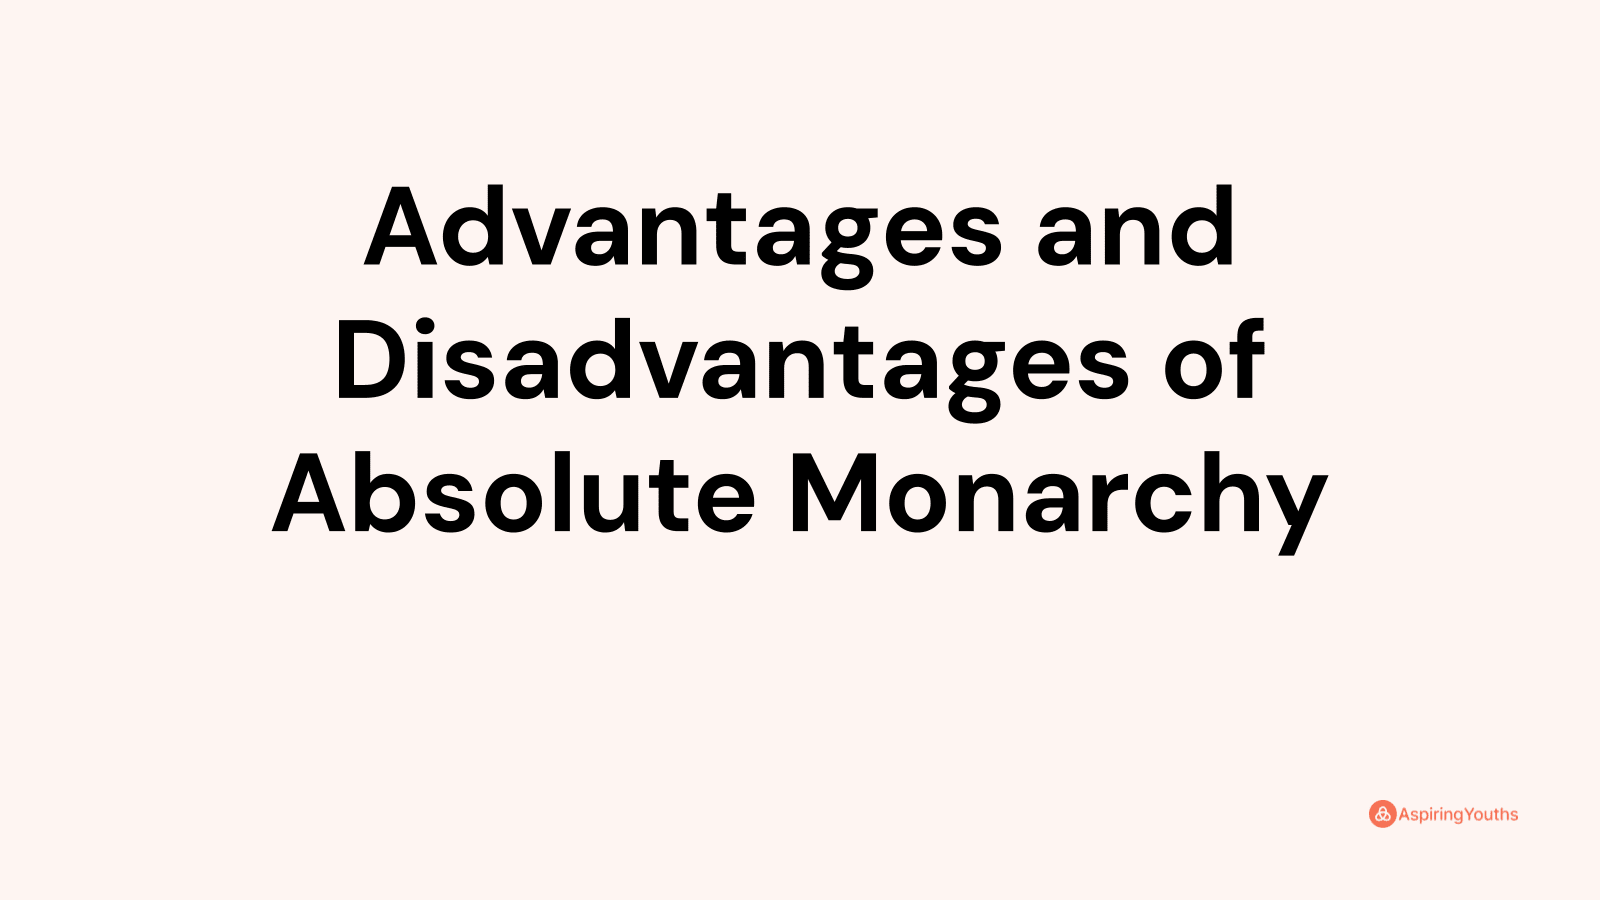 Advantages and disadvantages of Absolute Monarchy